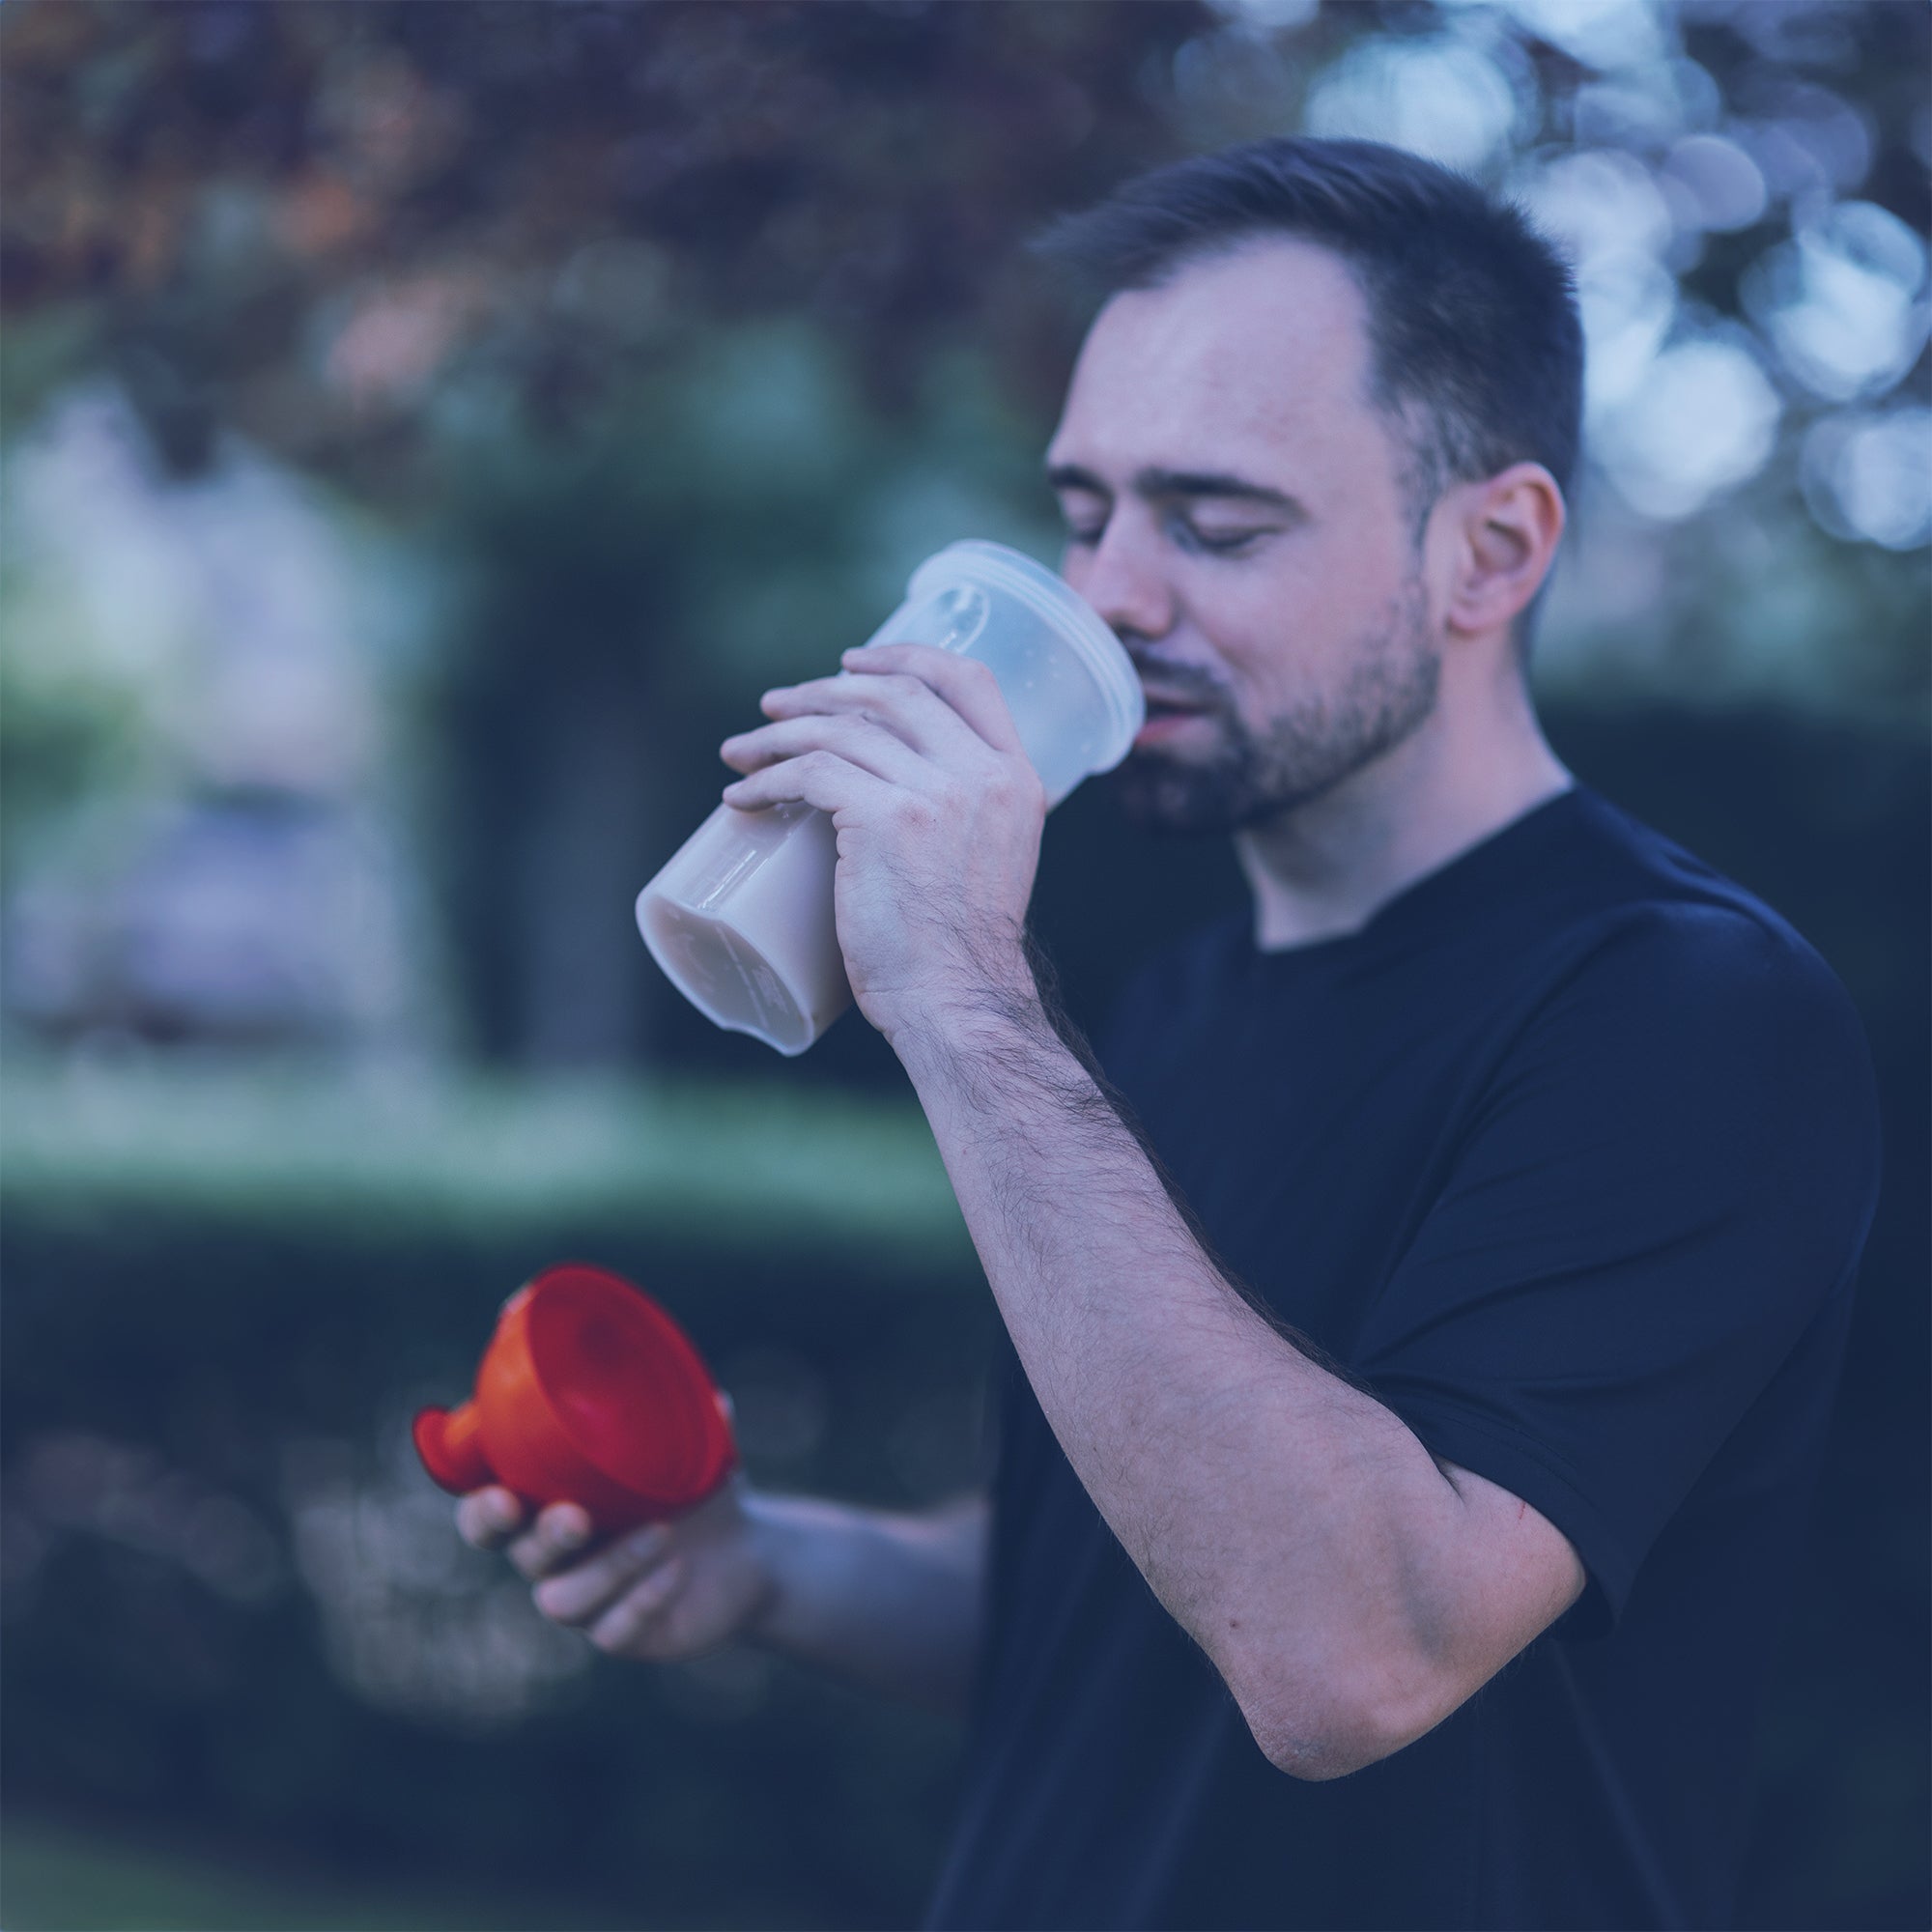 Man Drinking from what appears to be a Protein Mixer Cup